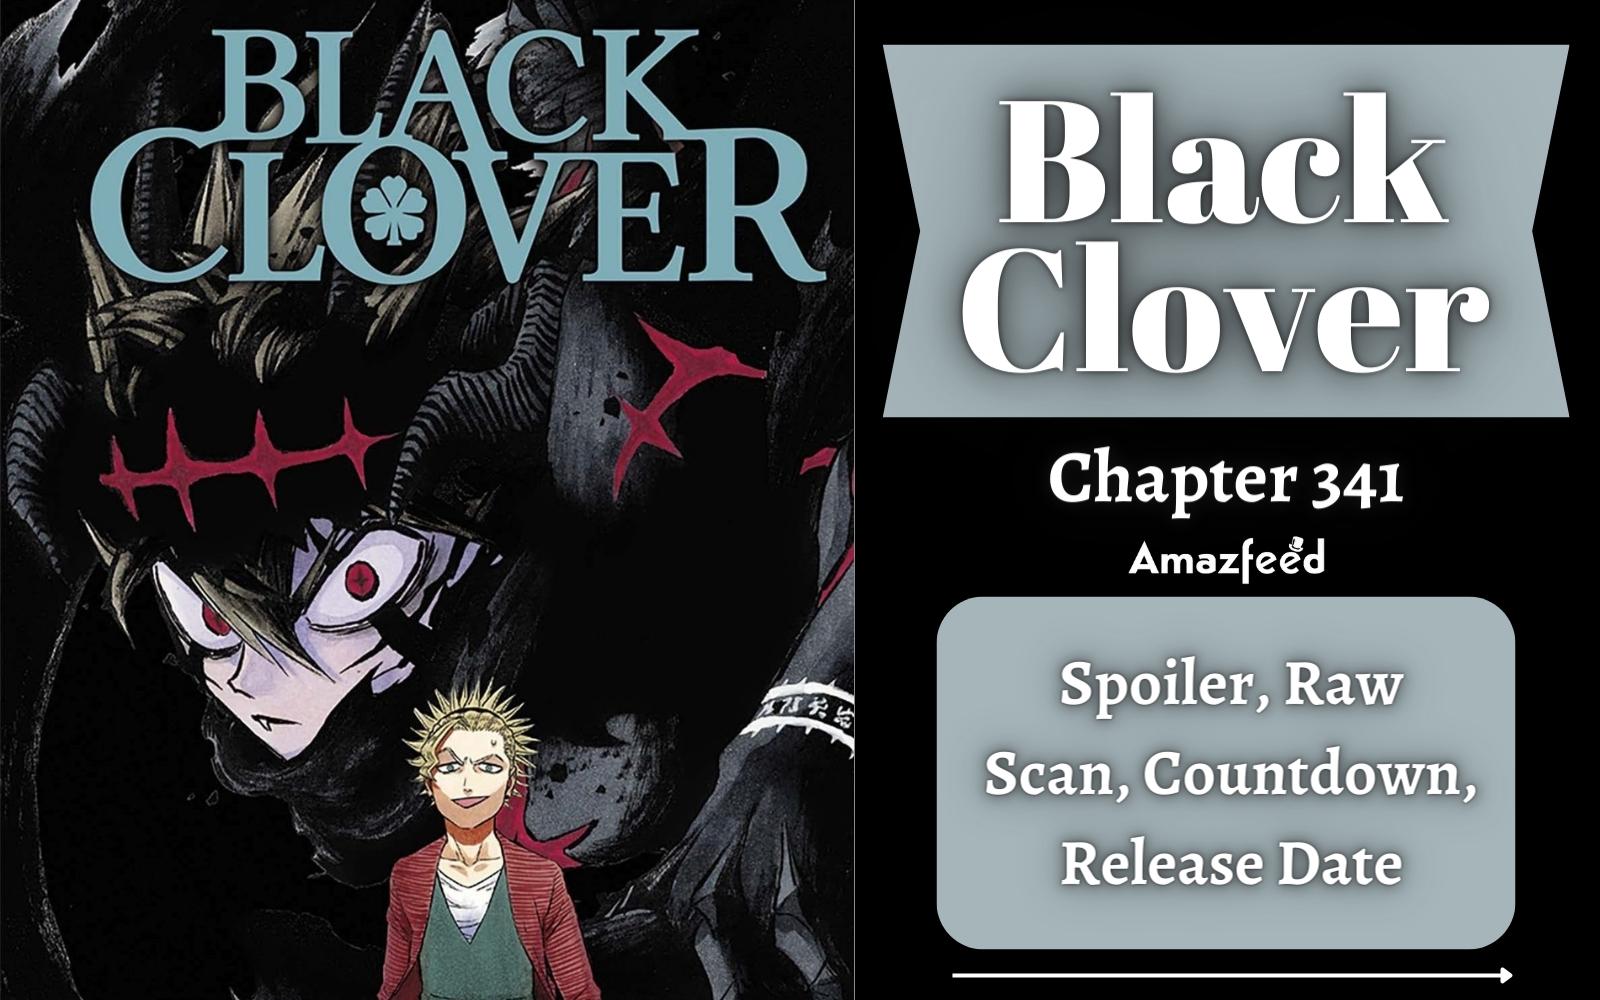 Black Clover Chapter 342 Spoiler, Plot, Raw Scan, Color Page, and Release Date